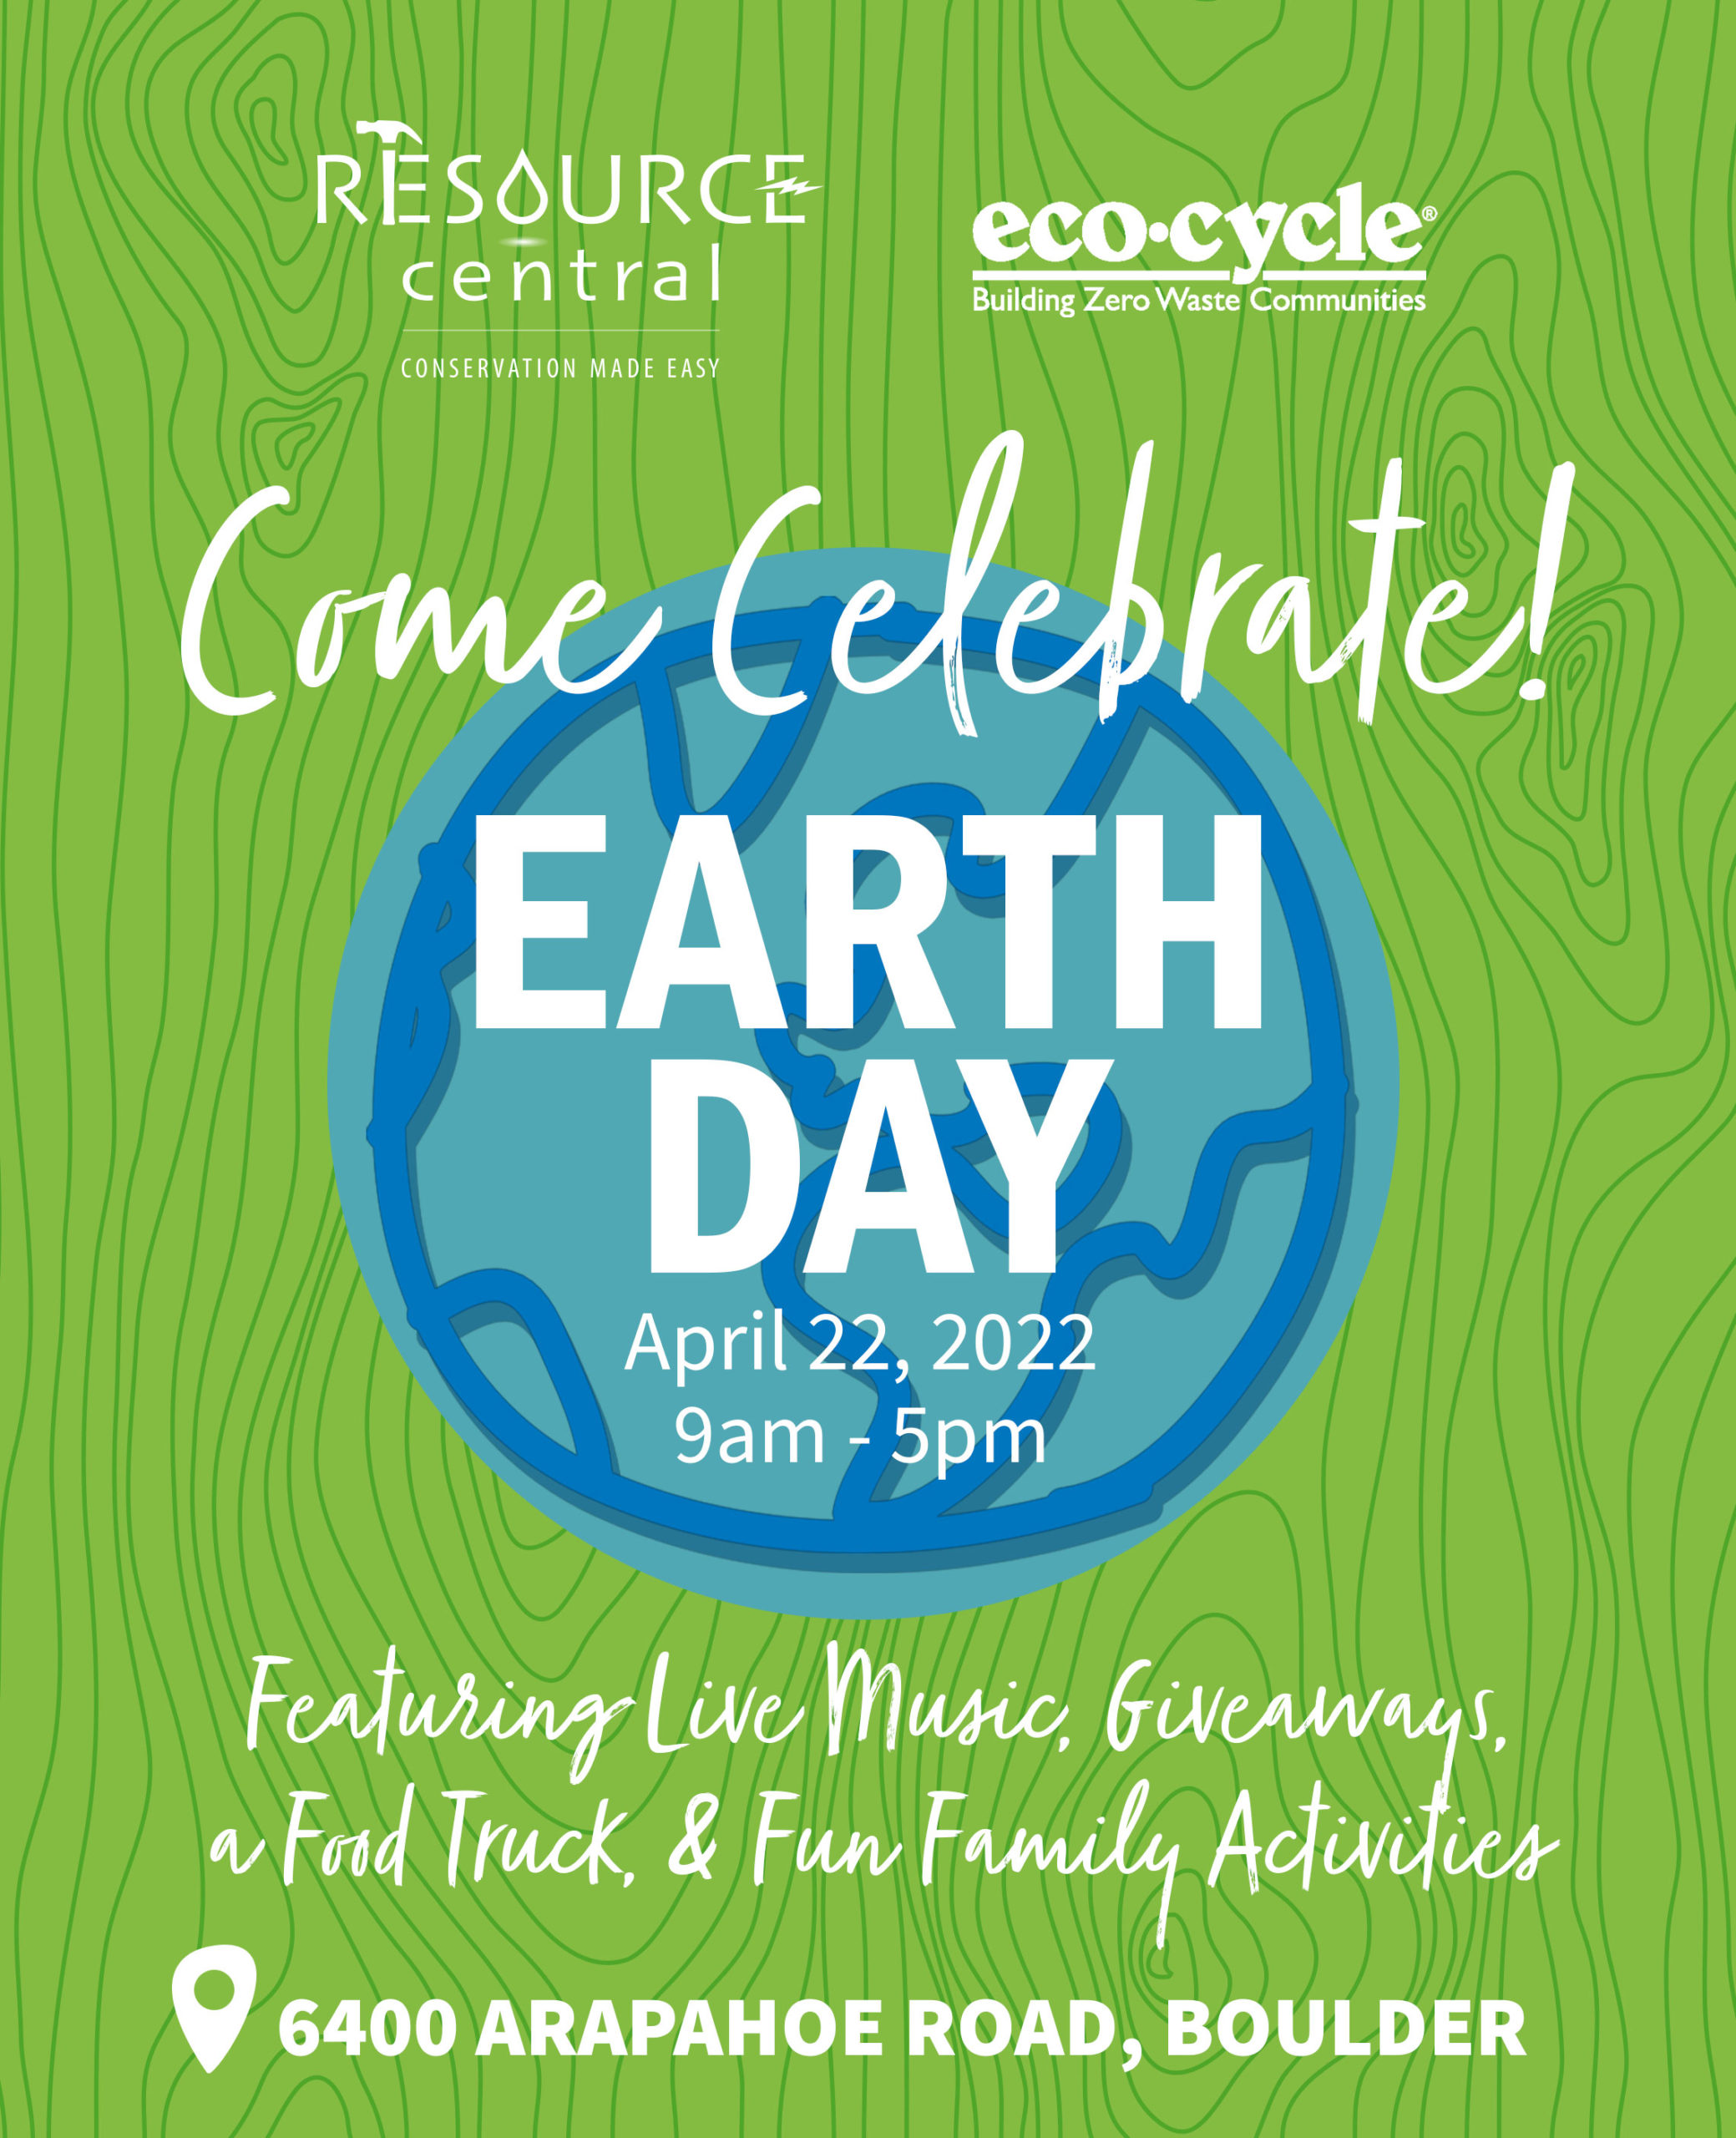 Earth Day Celebration at Resource Central and Eco-Cycle